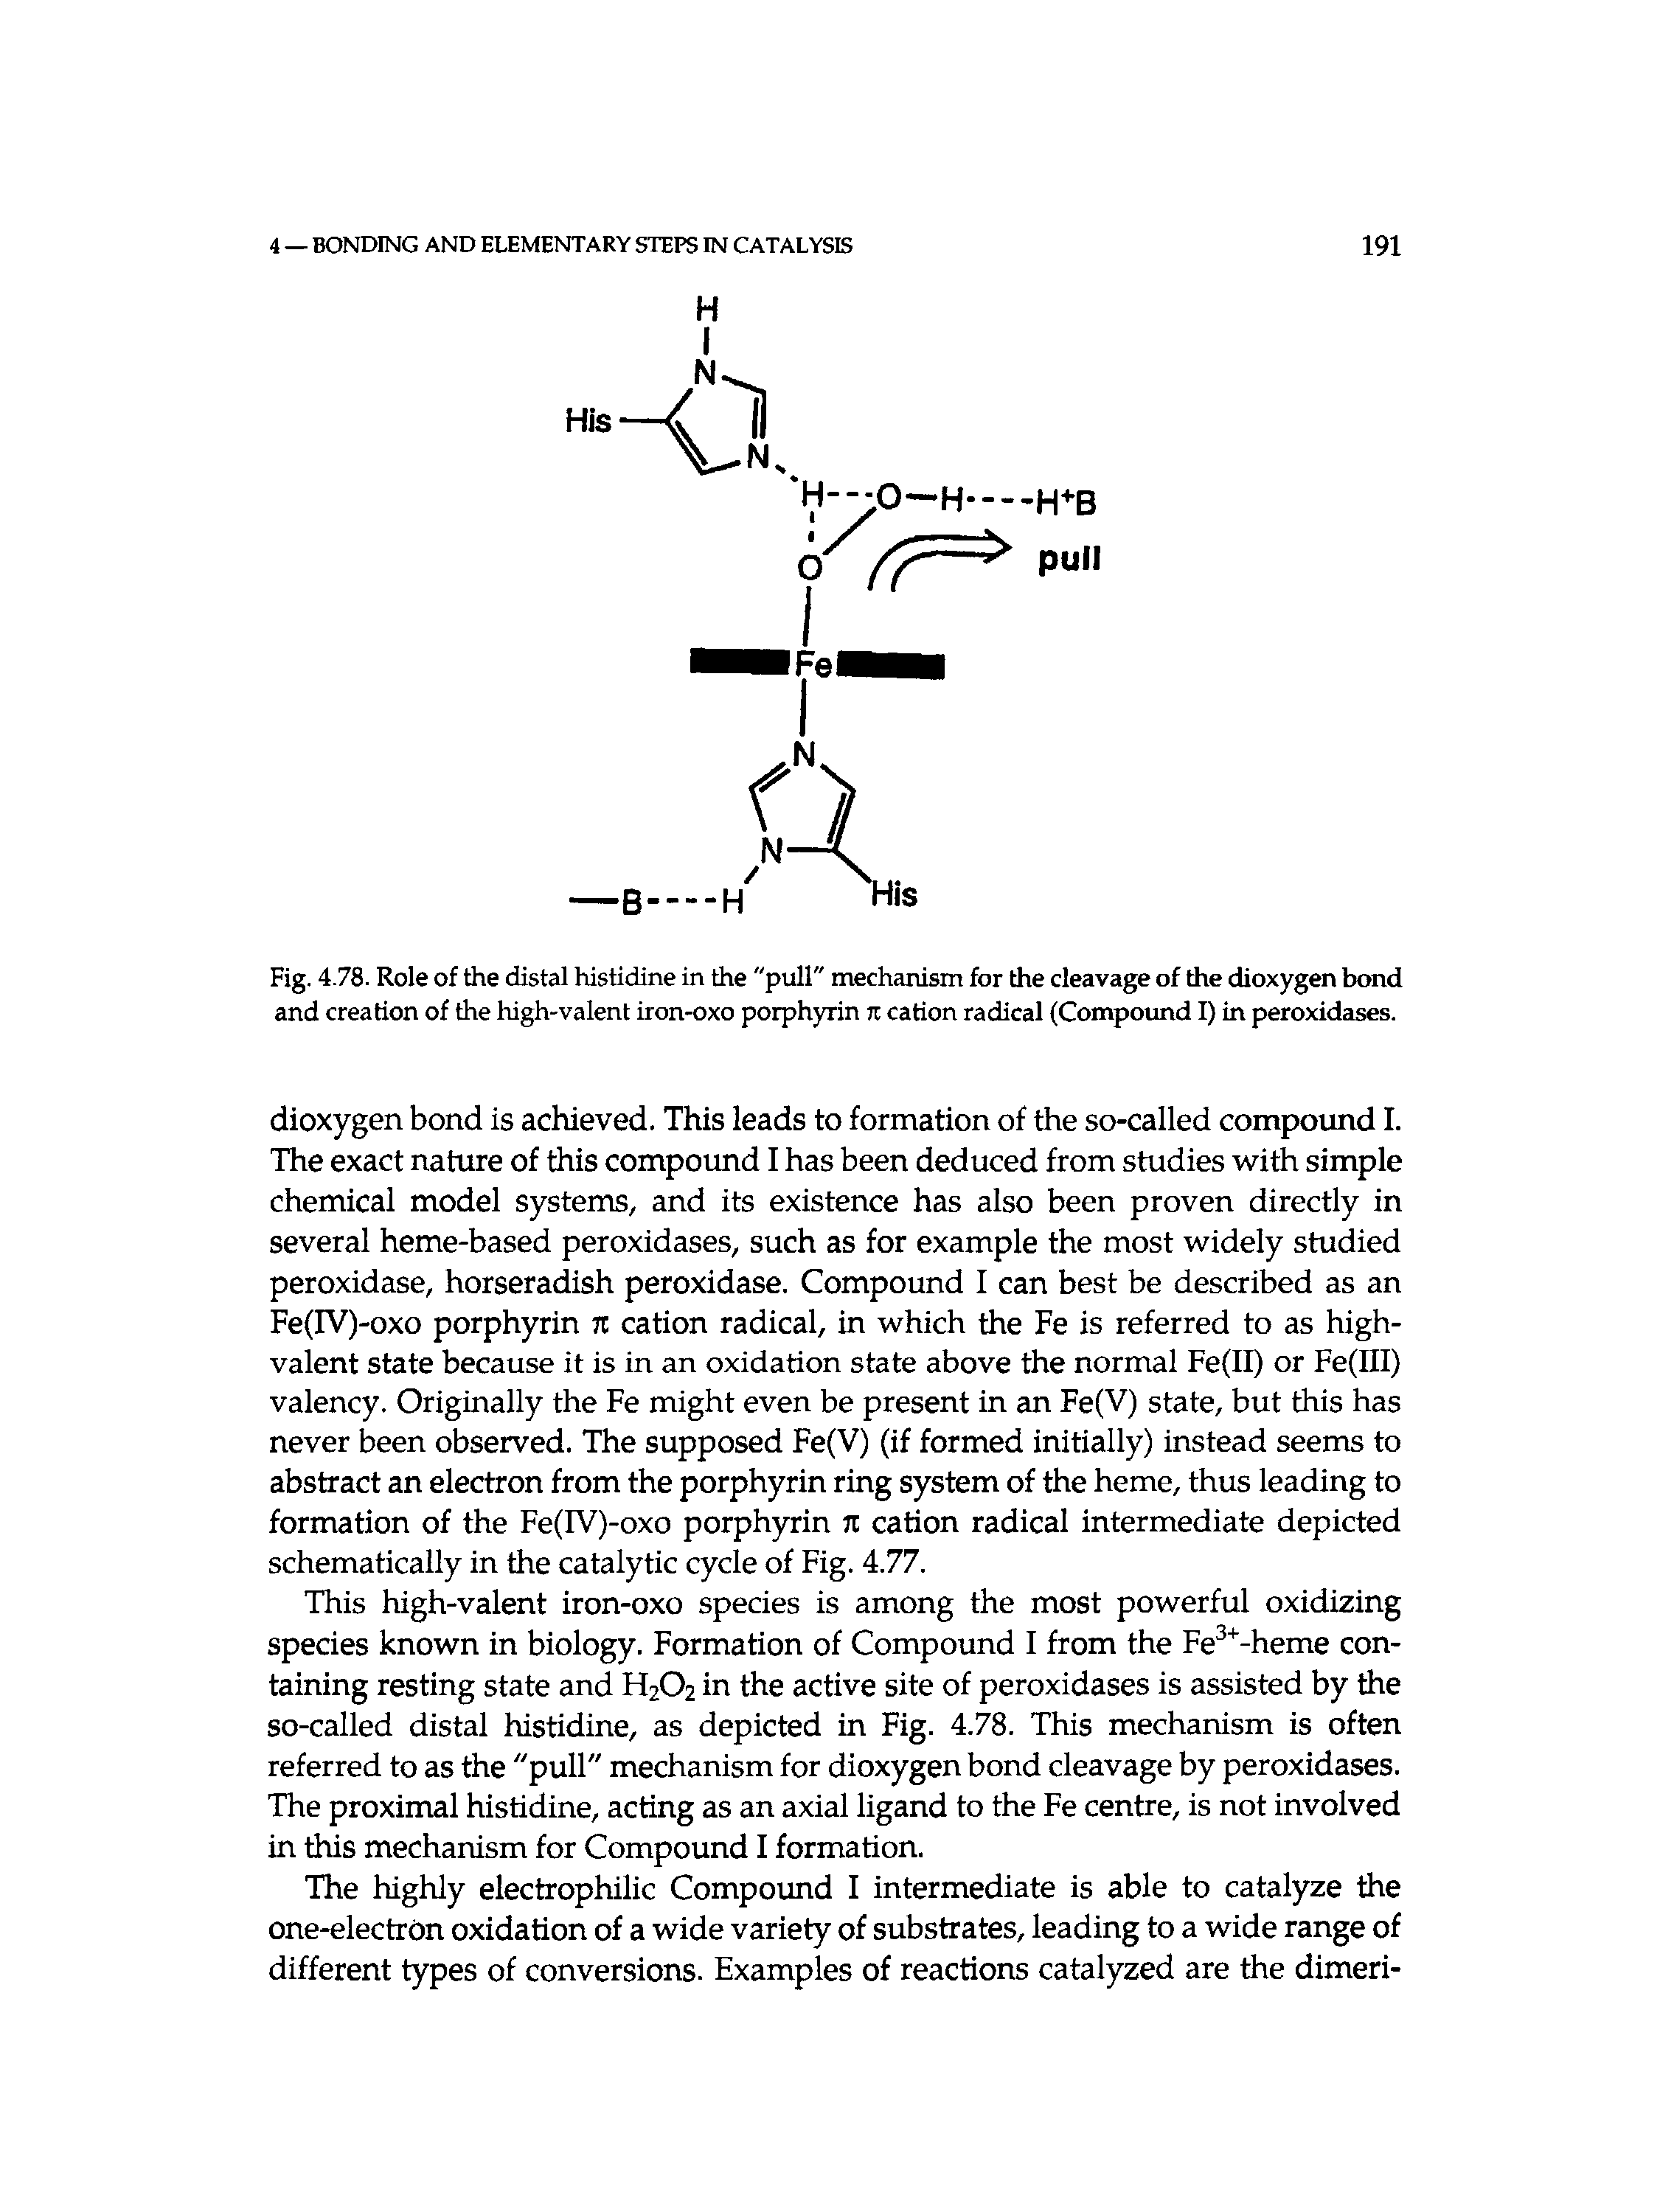 Fig. 4.78. Role of the distal histidine in the "pull" mechanism for the cleavage of the dioxygen bond and creation of the high-valent iron-oxo porphyrin it cation radical (Compound I) in peroxidases.